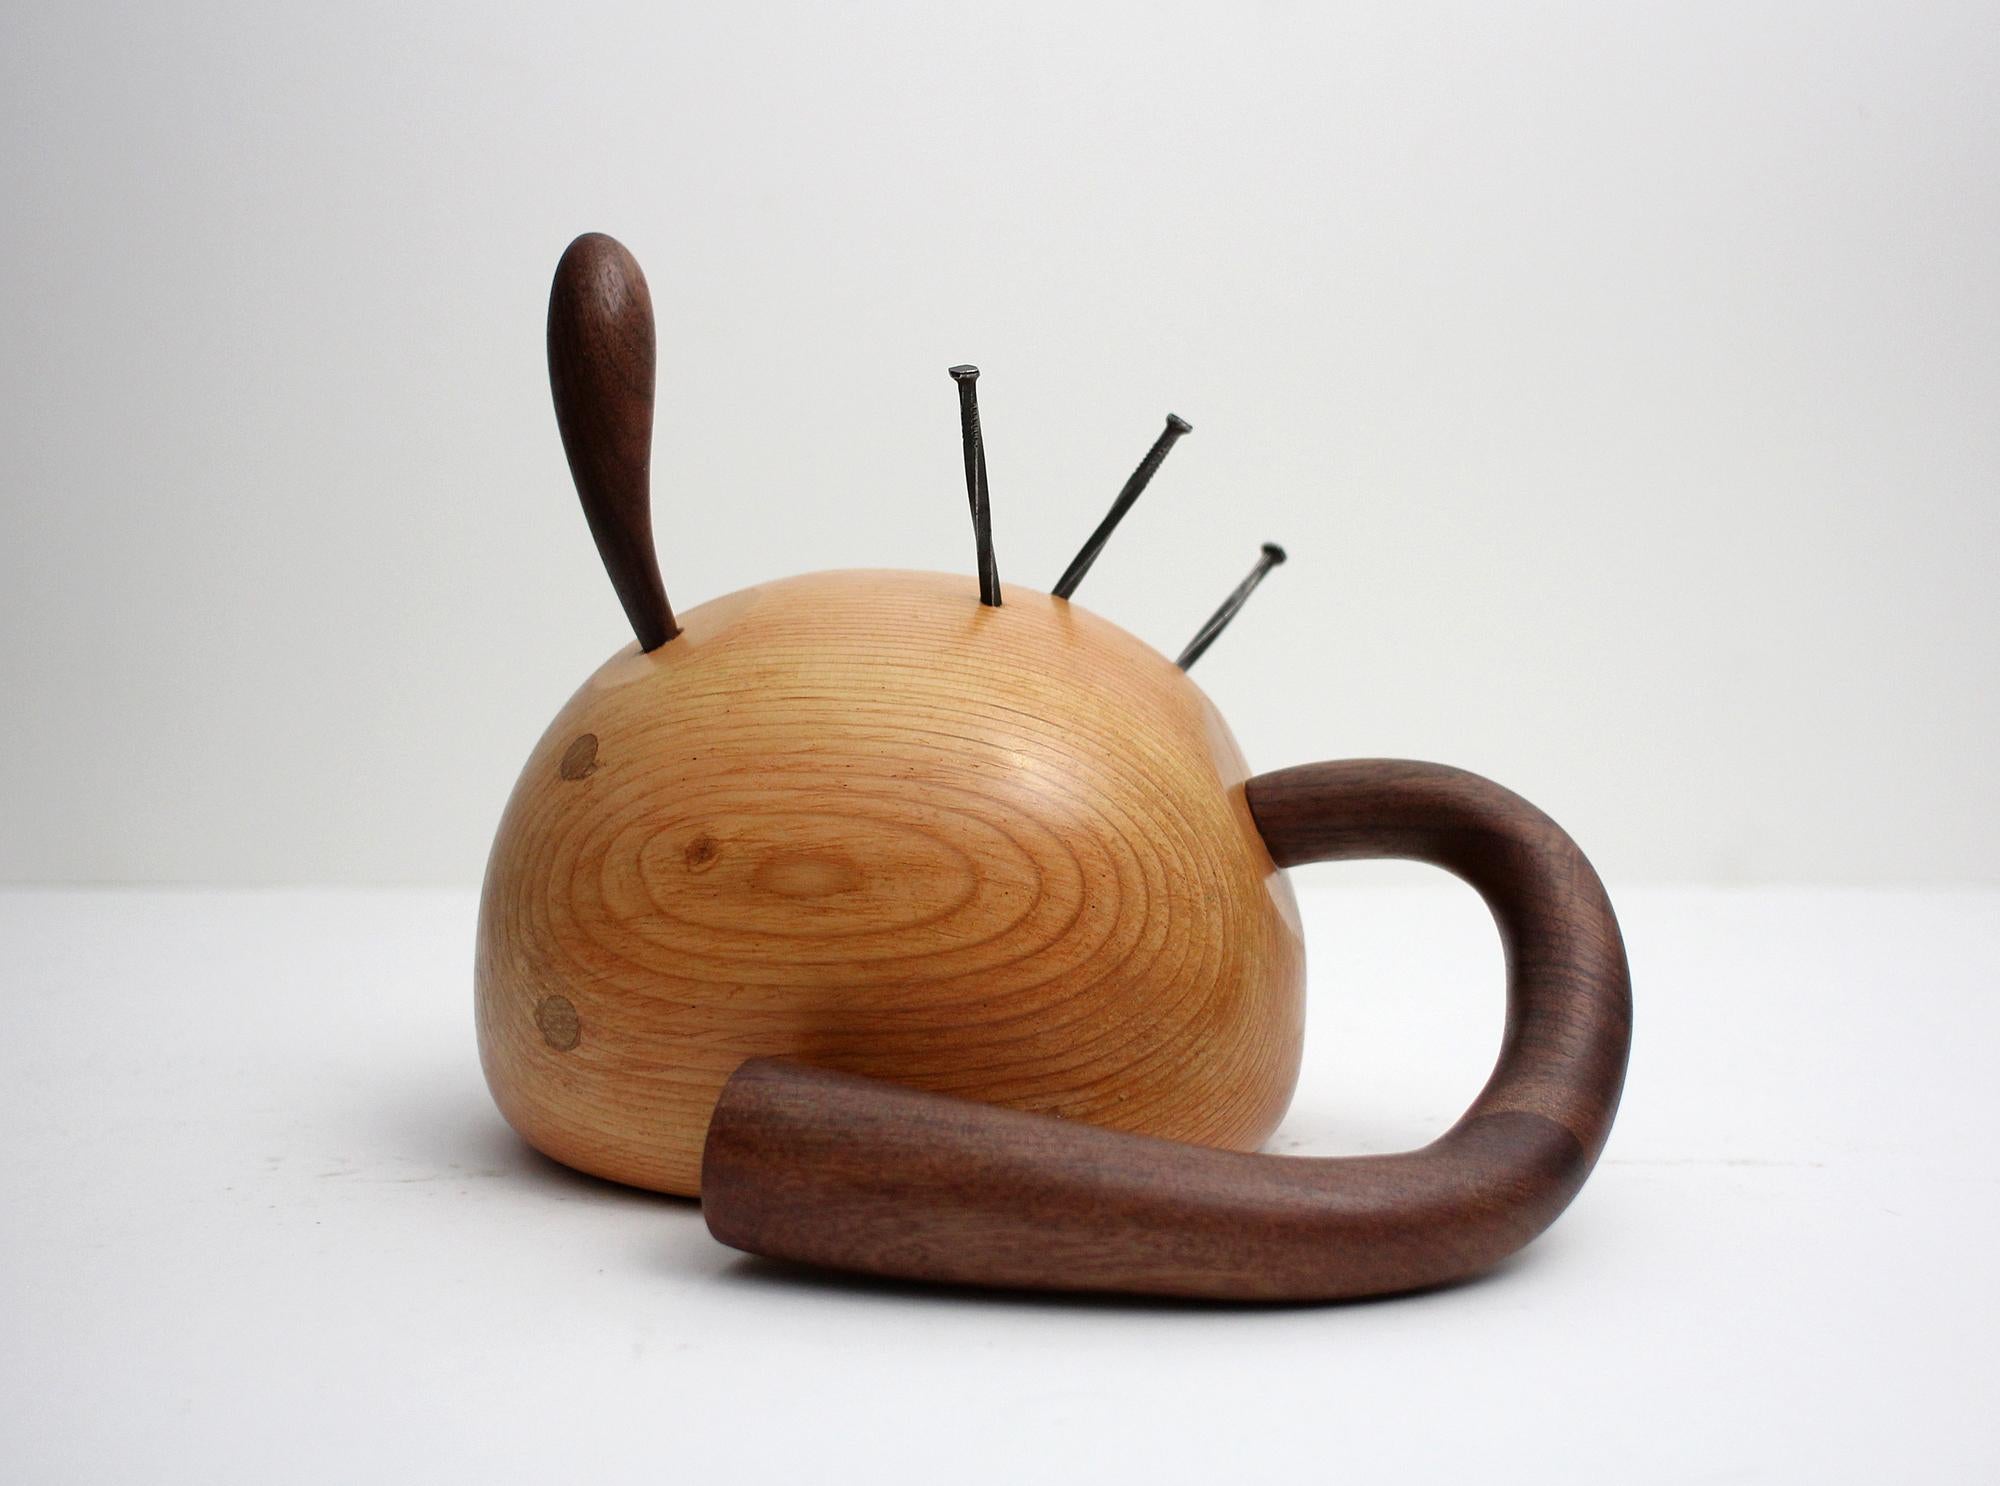 John Maloof Abstract Sculpture - 3 Nails, organic sculpture in wood